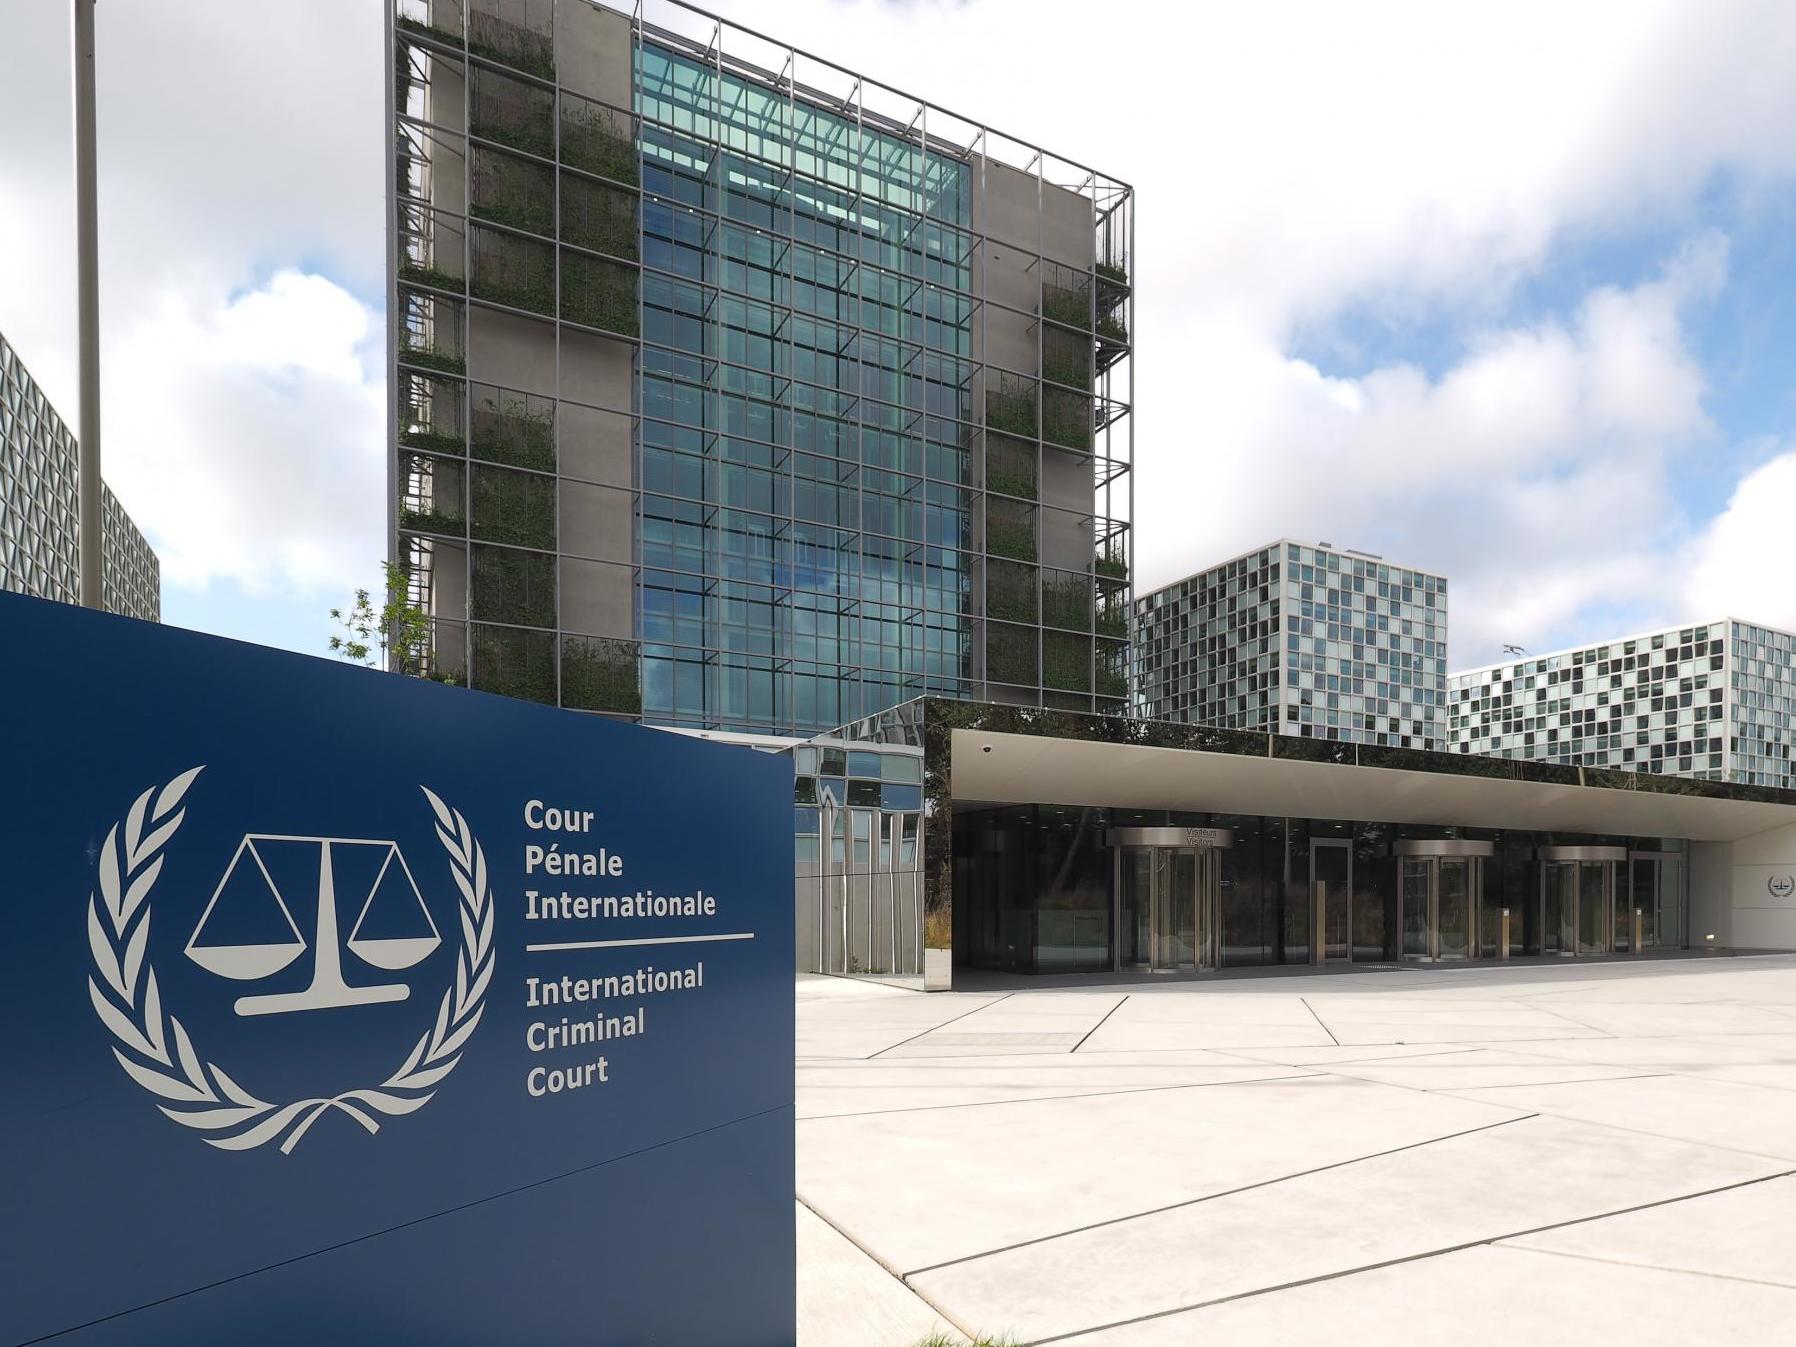 A complaint has been submitted to the ICC on behalf of two groups over China's treatment of Uighurs and other ethnic groups